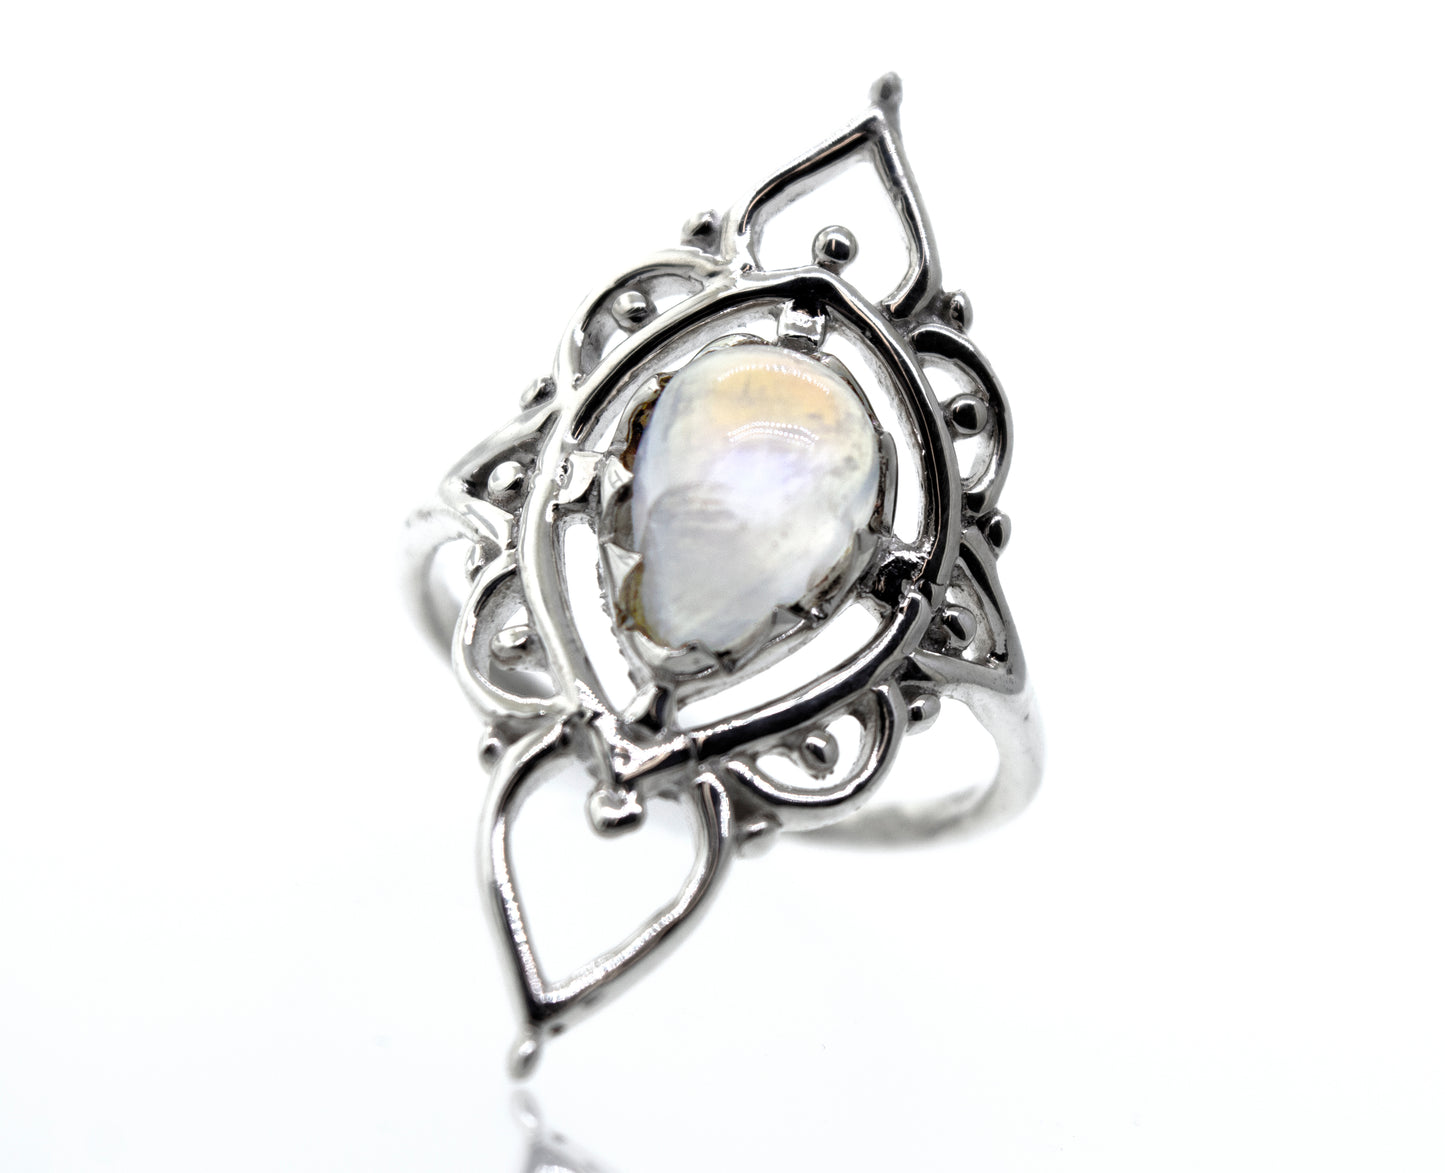 A Super Silver designer sterling silver ring with a moonstone in the center.